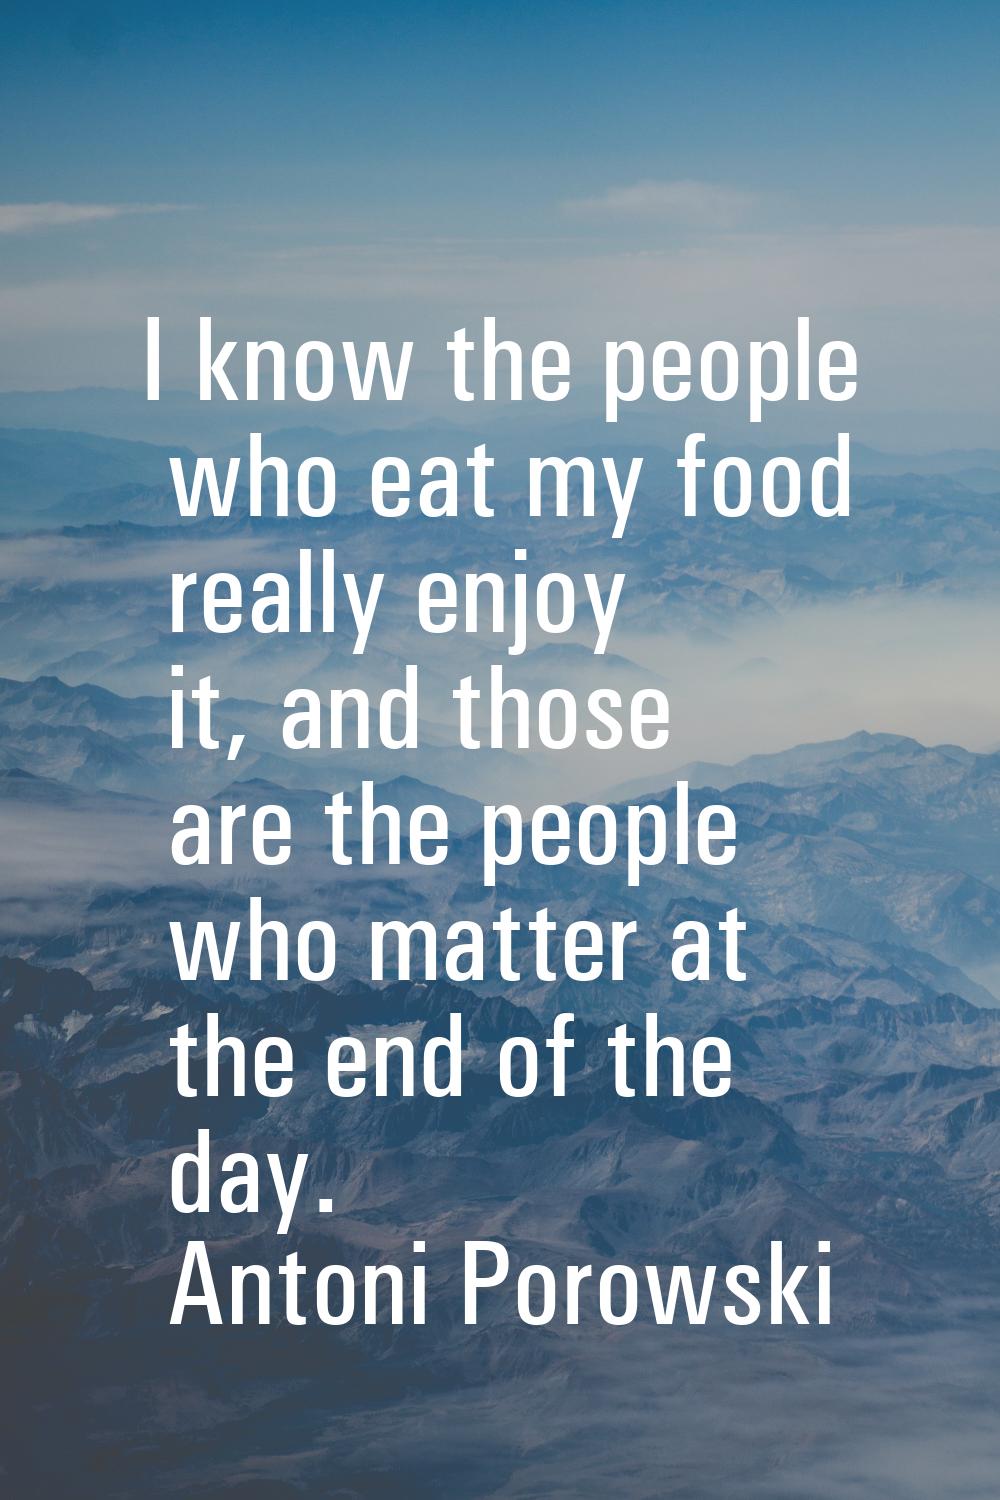 I know the people who eat my food really enjoy it, and those are the people who matter at the end o